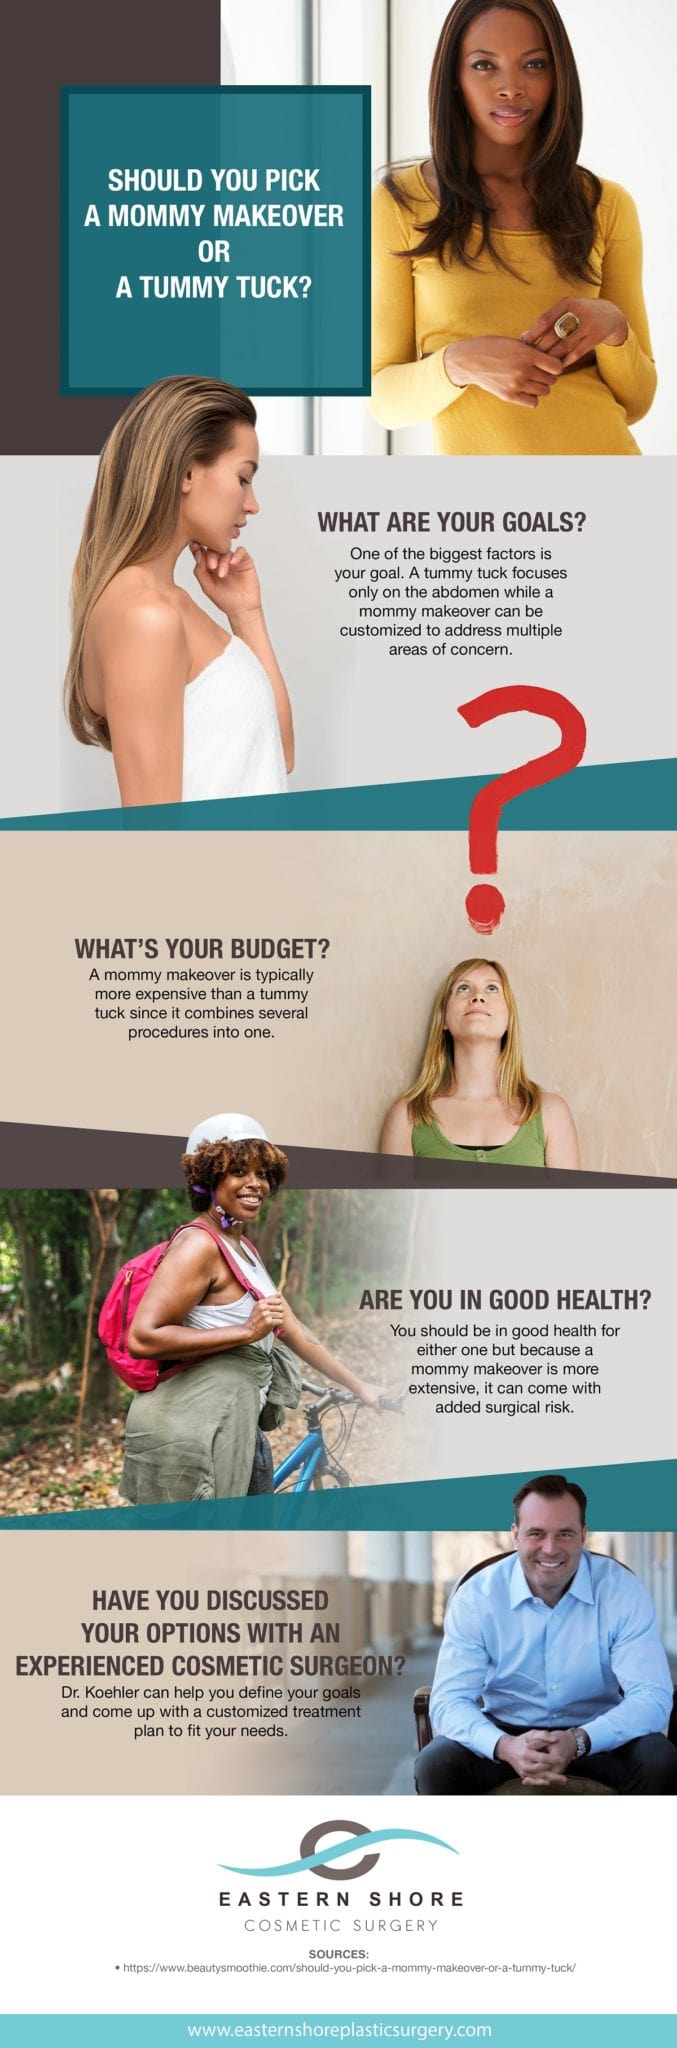 Should You Pick a Mommy Makeover or A Tummy Tuck? [Infographic] img 1